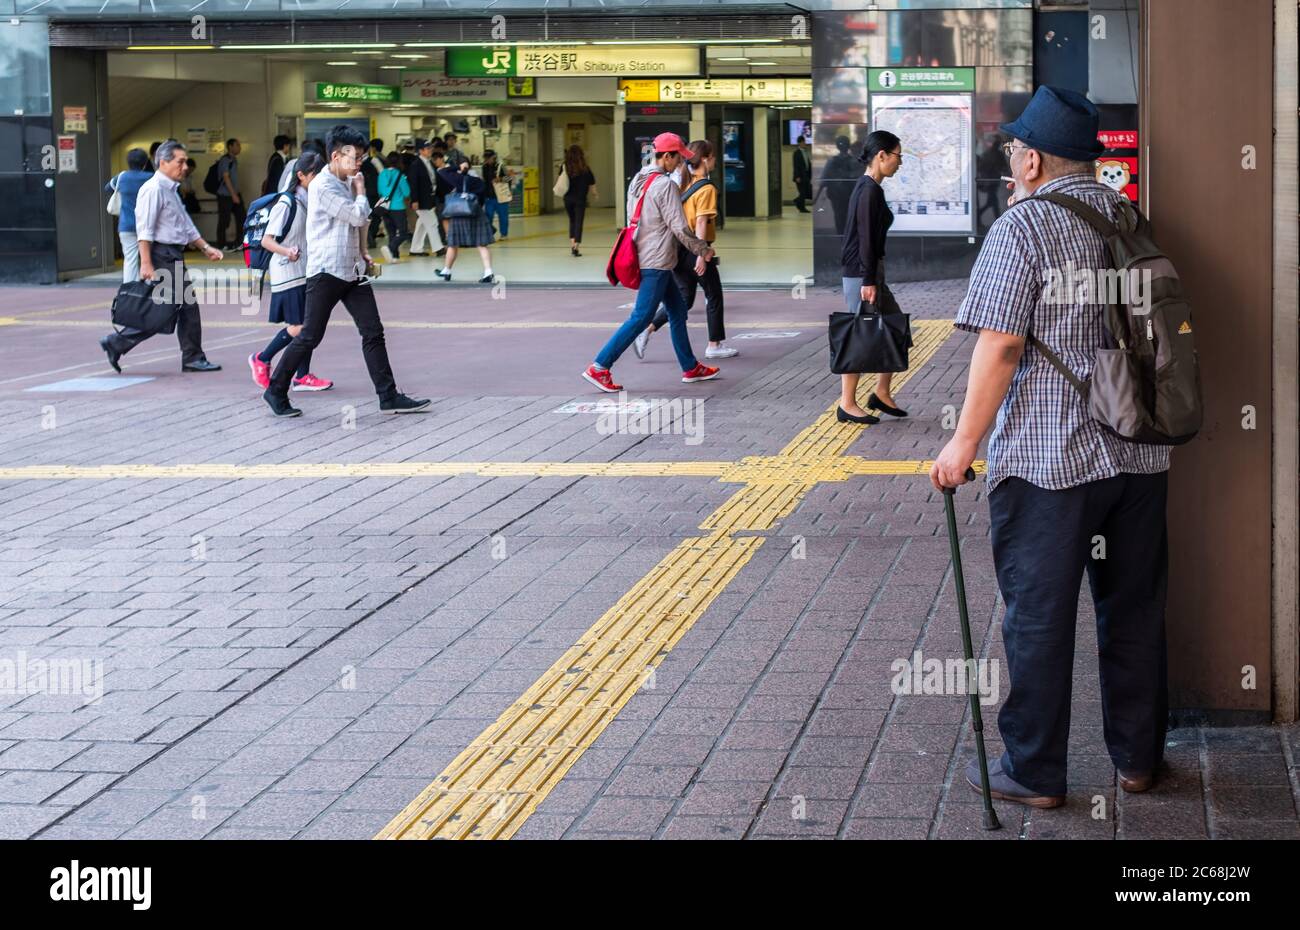 Elderly man with a walking cane in Hachiko square, Tokyo, Japan Stock Photo